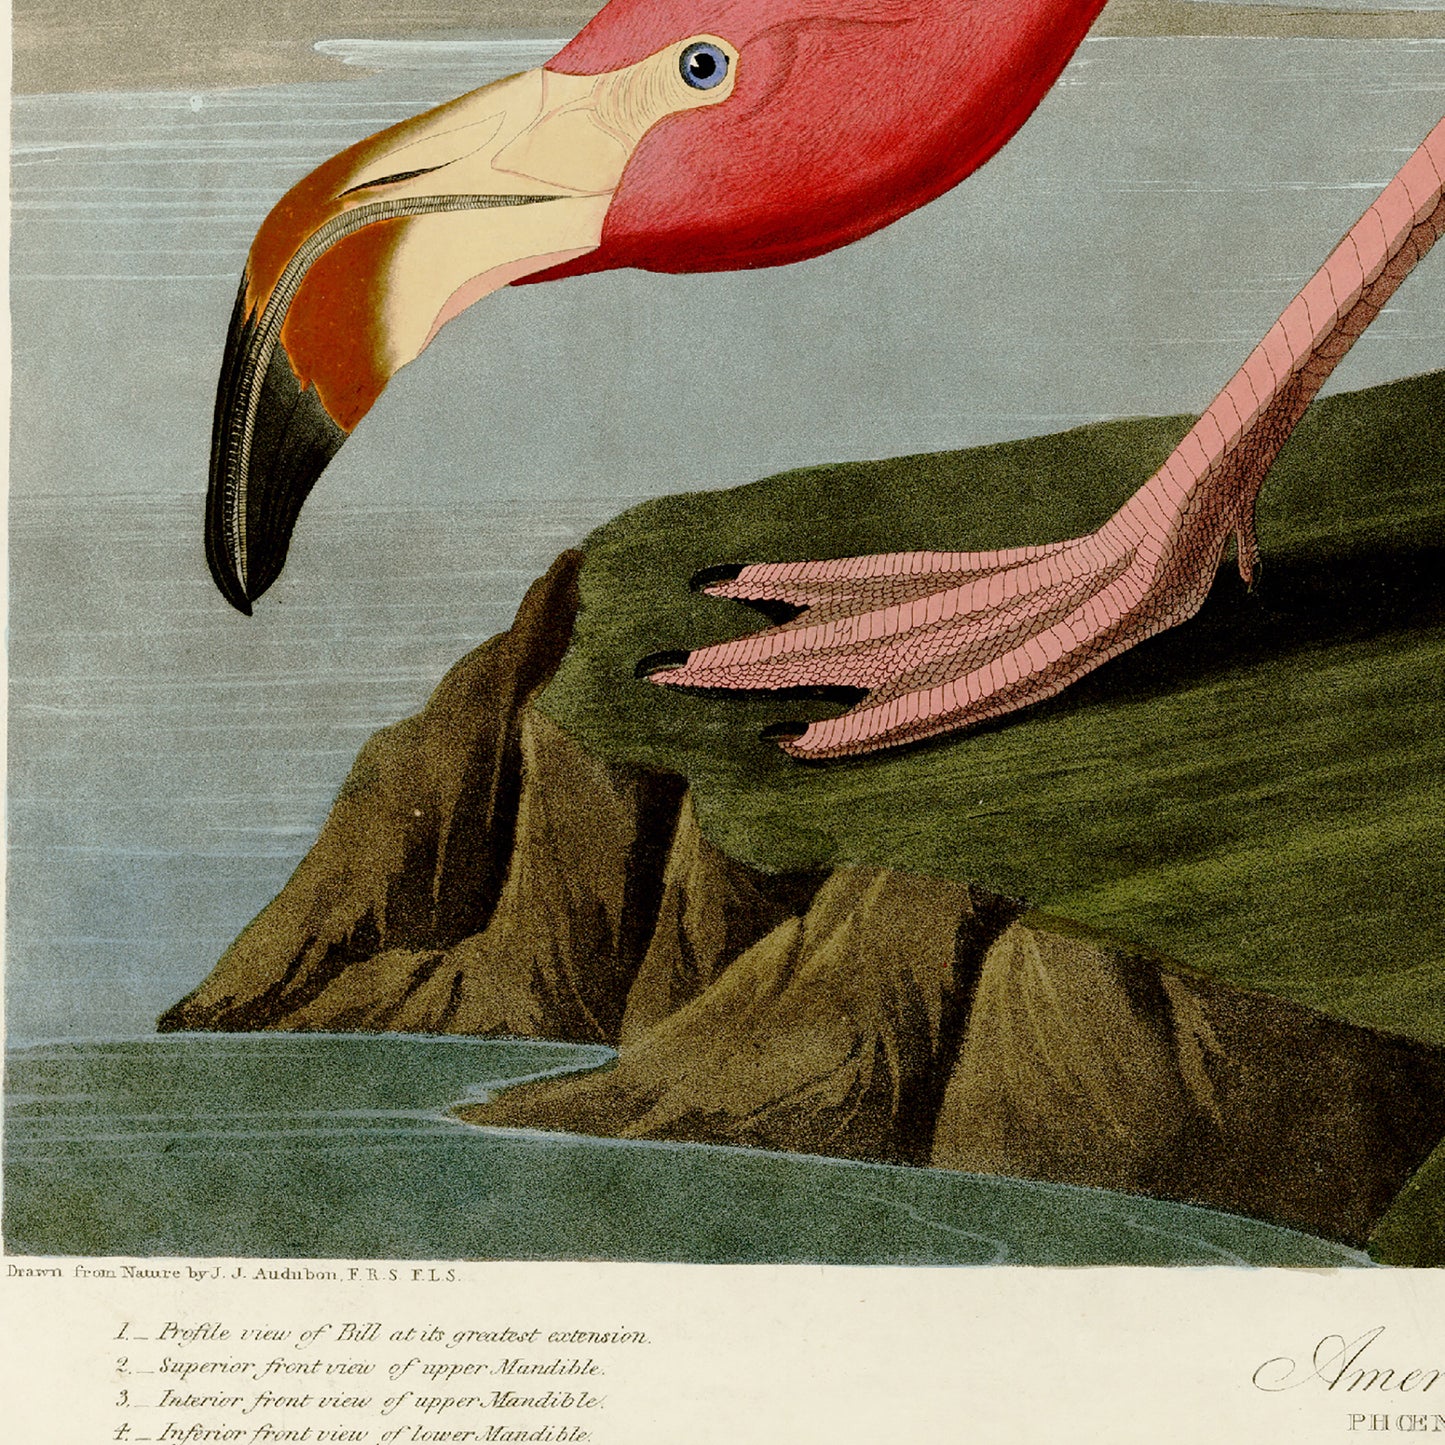 A Pink Flamingo from the general history of birds Poster